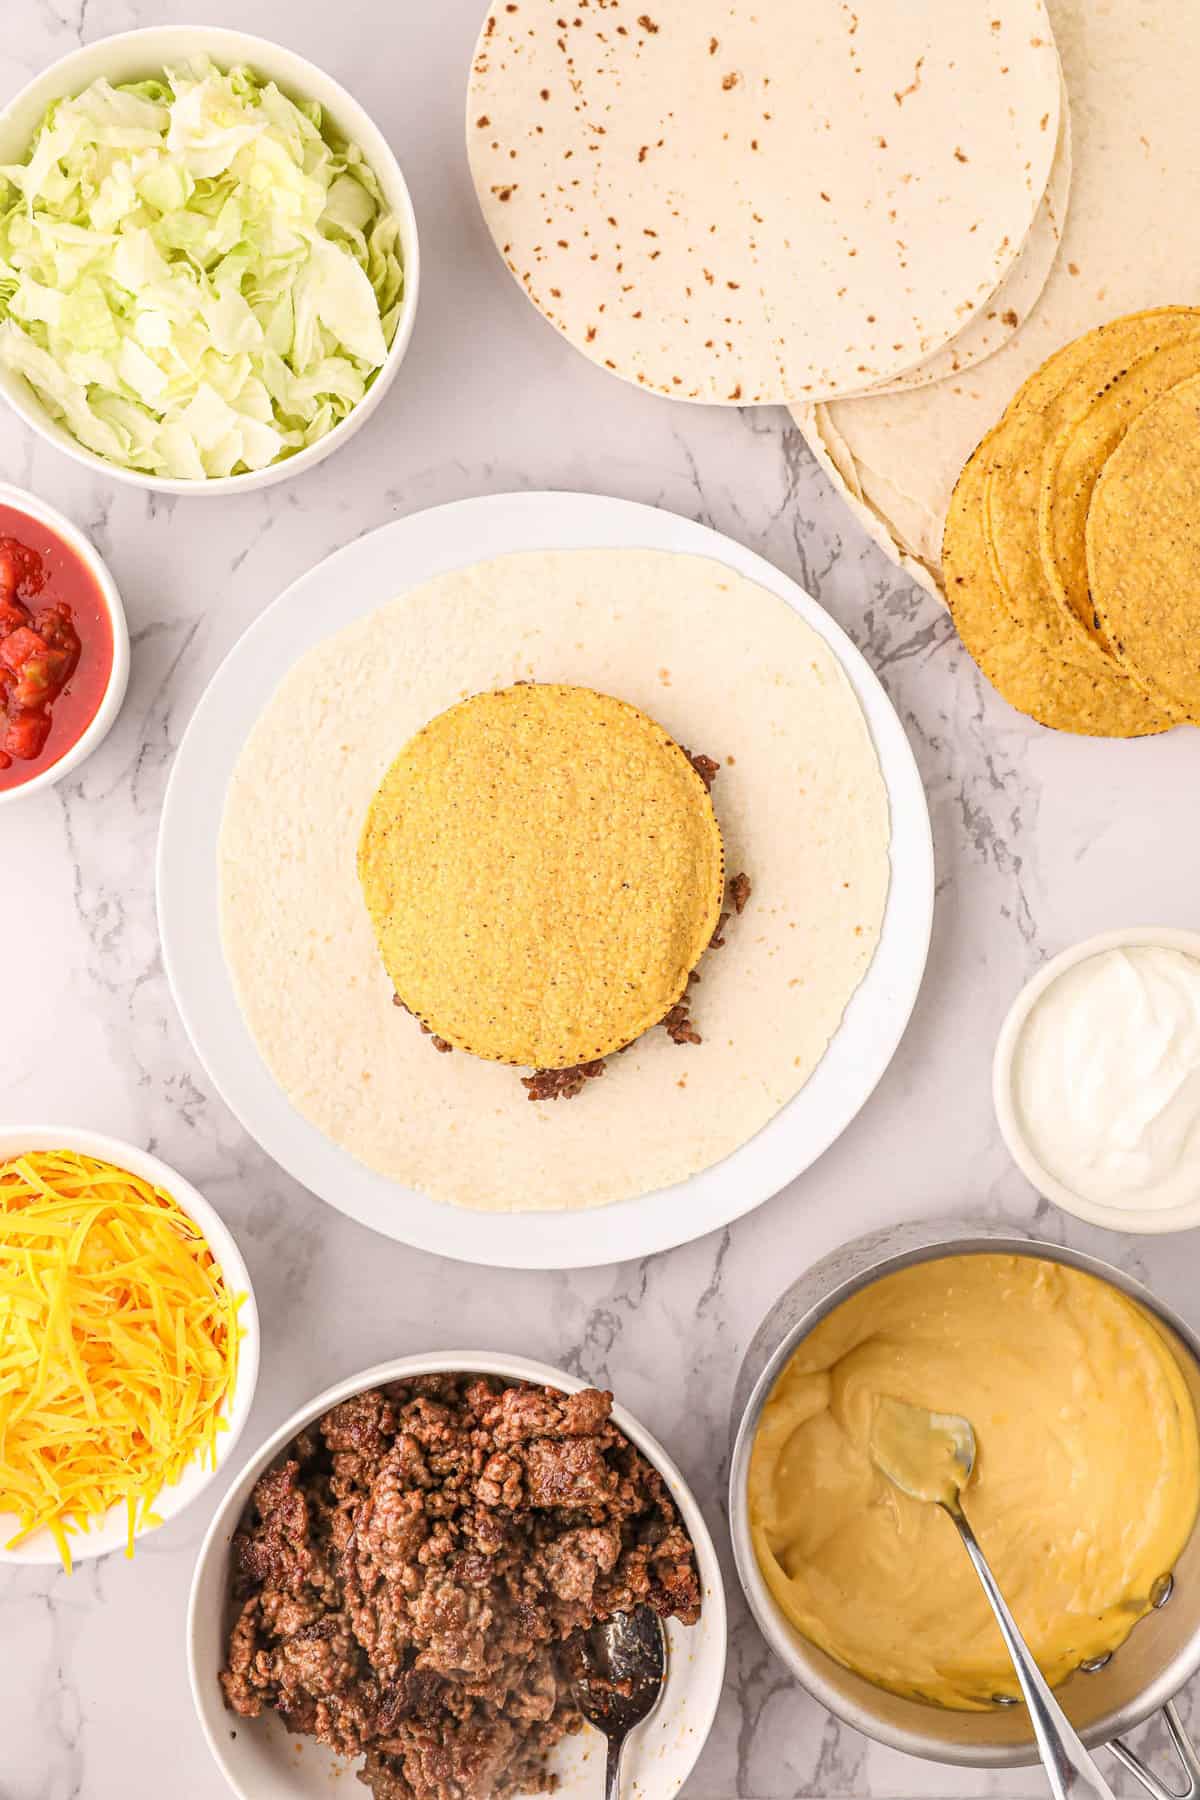 Topping Blackstone Crunchwrap Ingredients with Tostada Shell